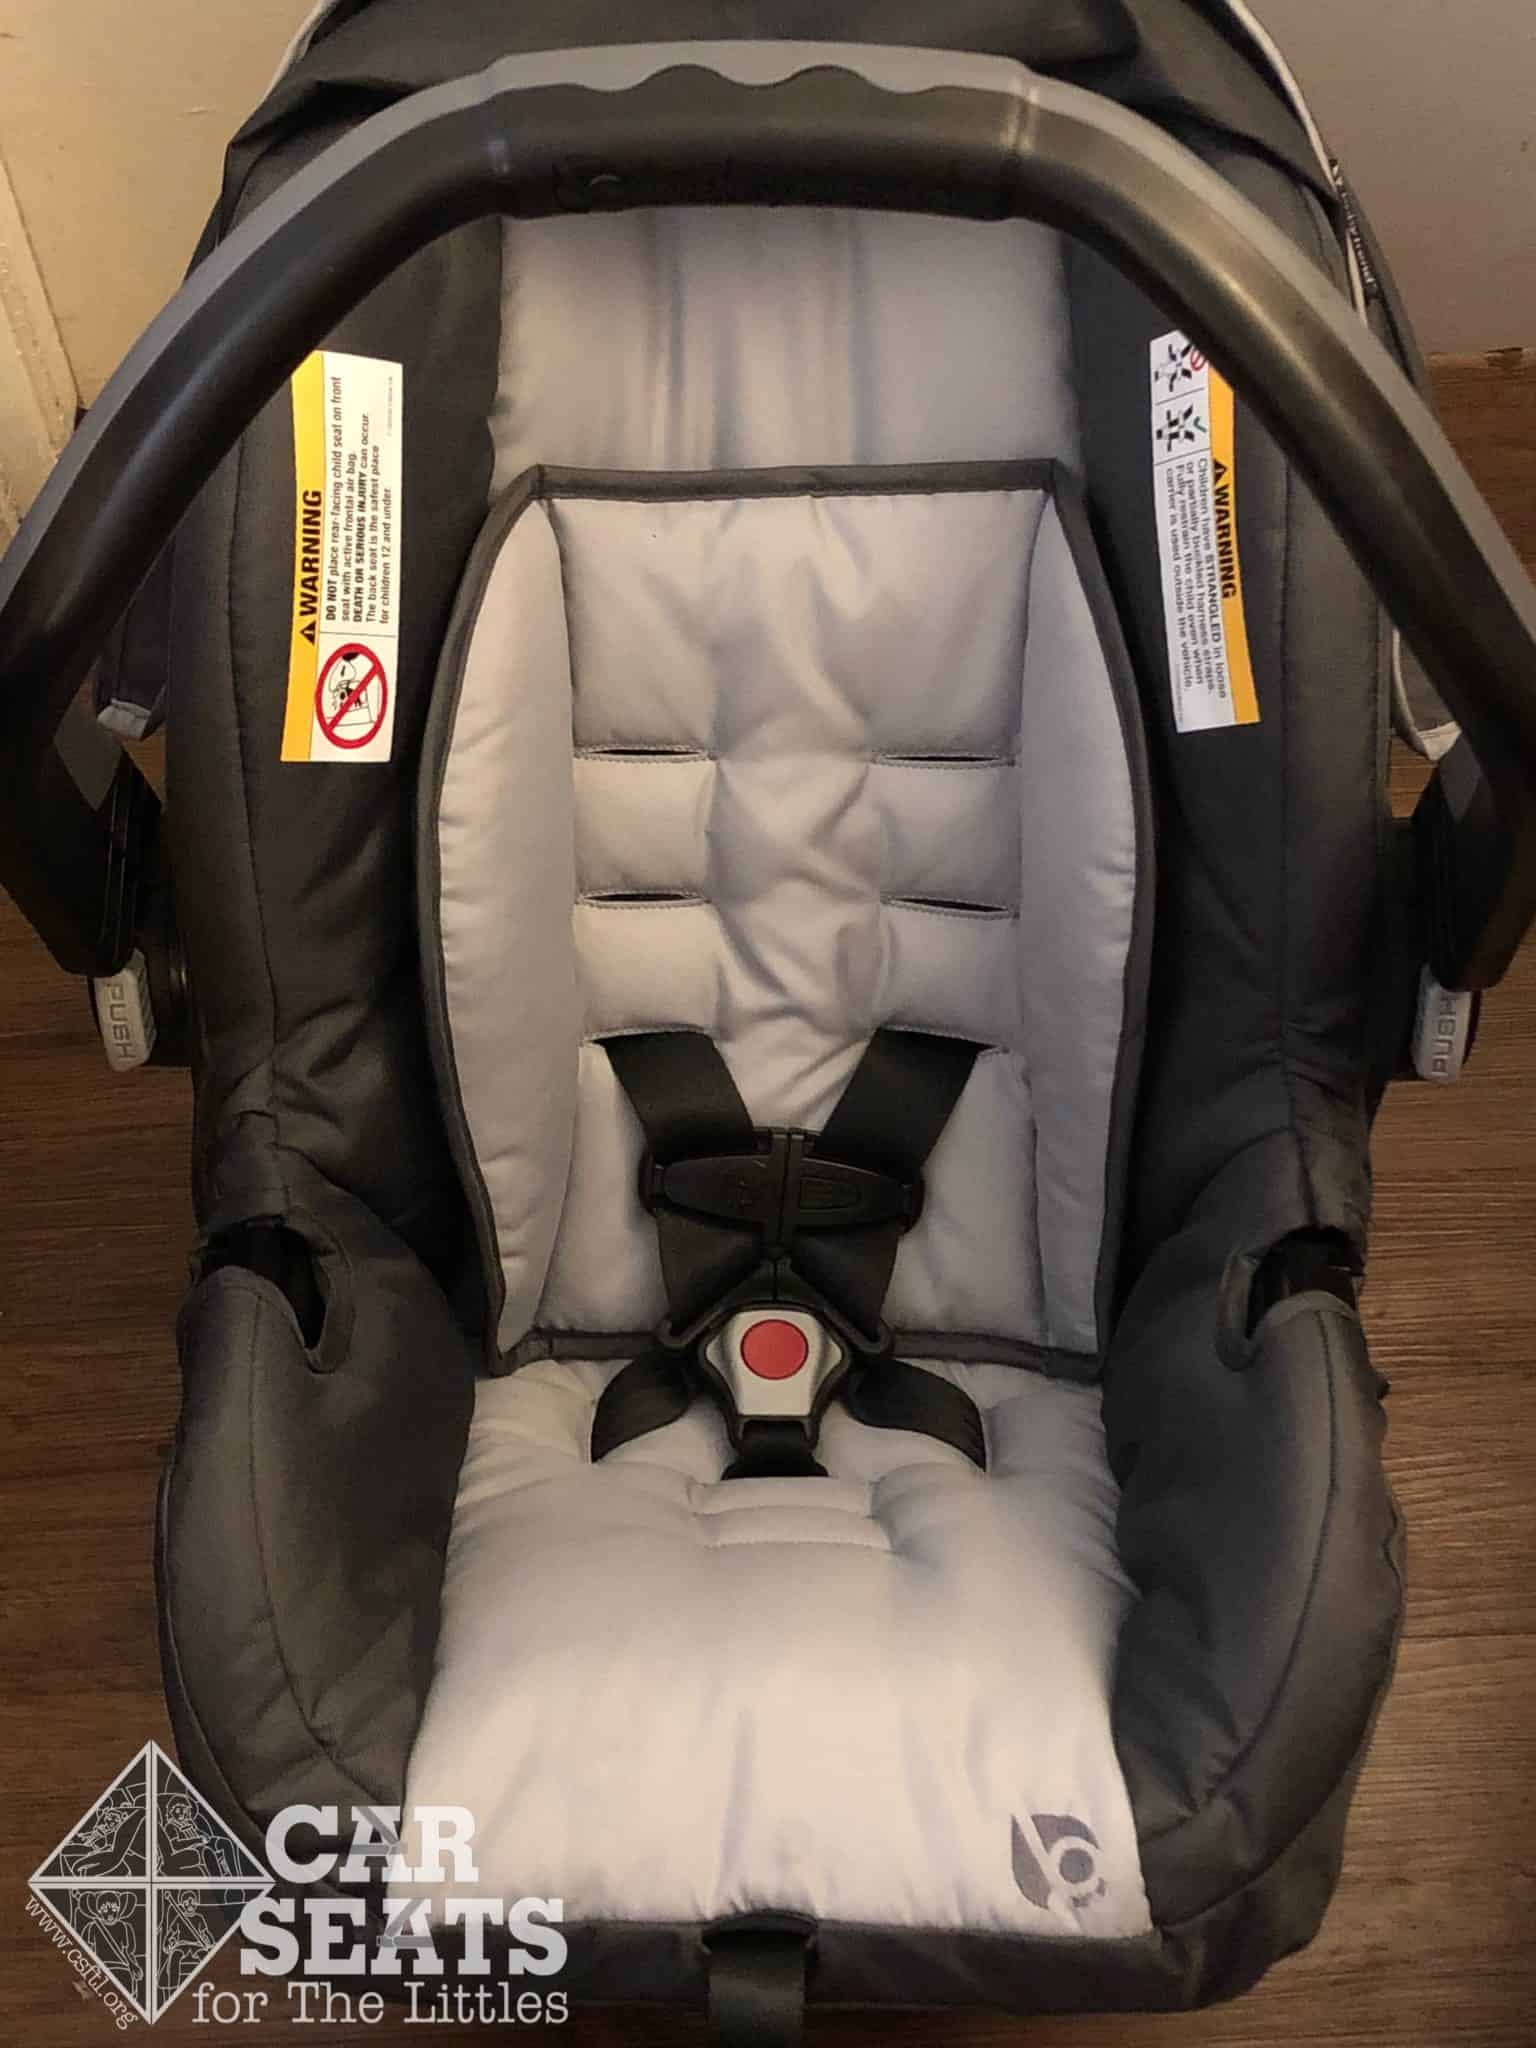 Baby Trend Seat Cover Indiapolyplus Com - Is Baby Trend Car Seat Good